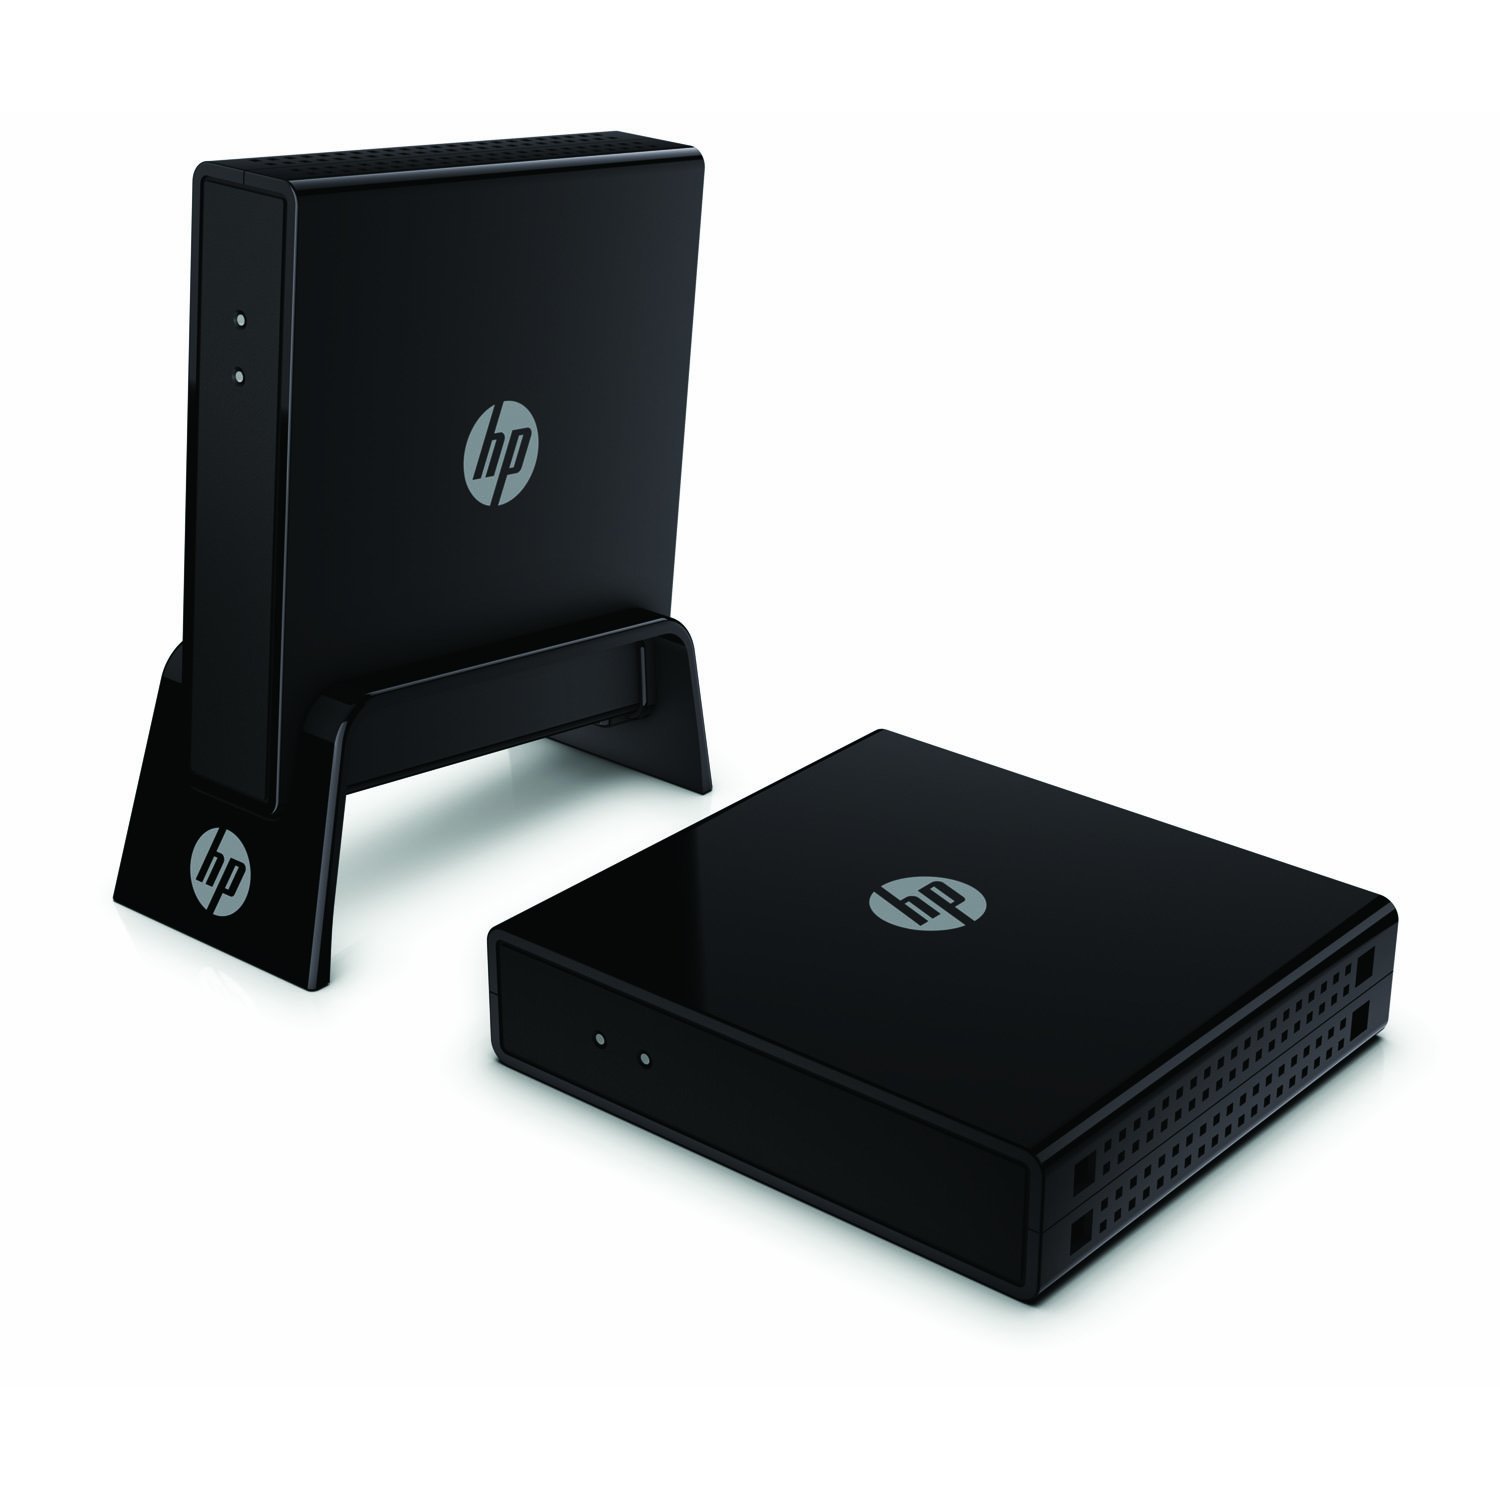 http://thetechjournal.com/wp-content/uploads/images/1111/1321668244-hp-wireless-tv-connect-adapter-3.jpg